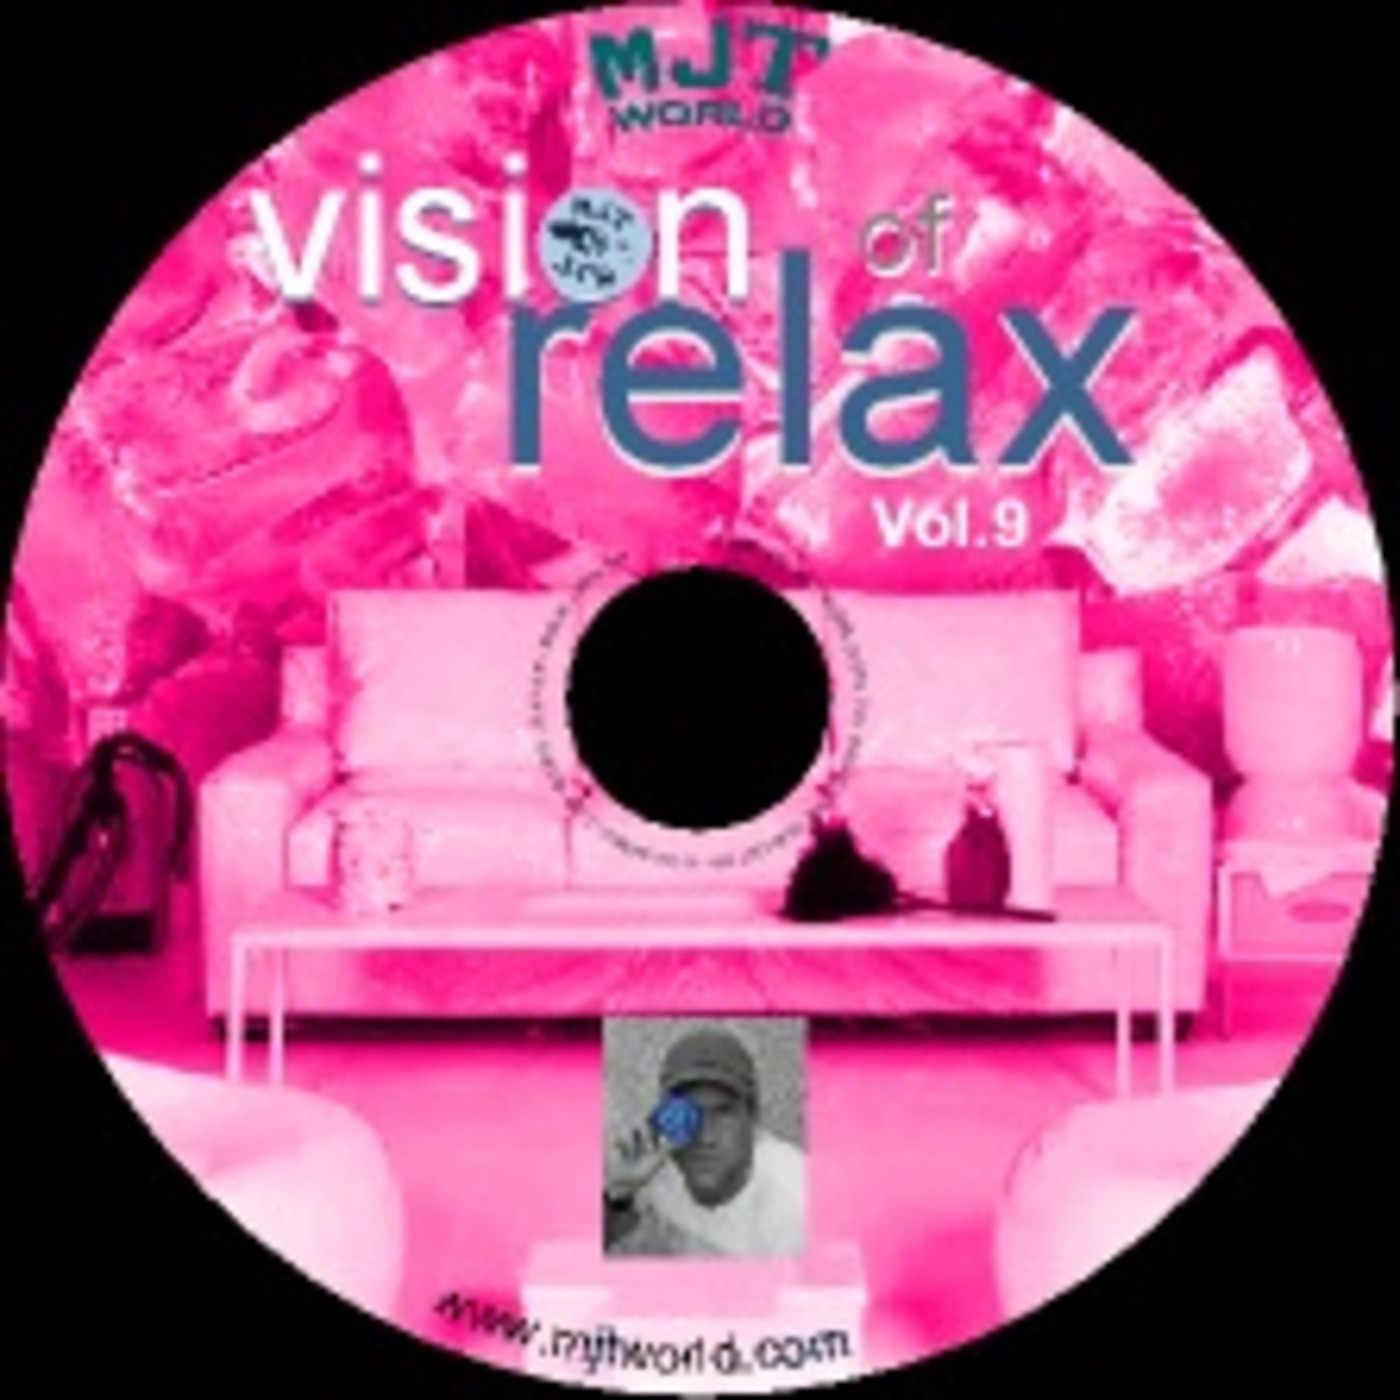 Vision of RELAX Vol.9